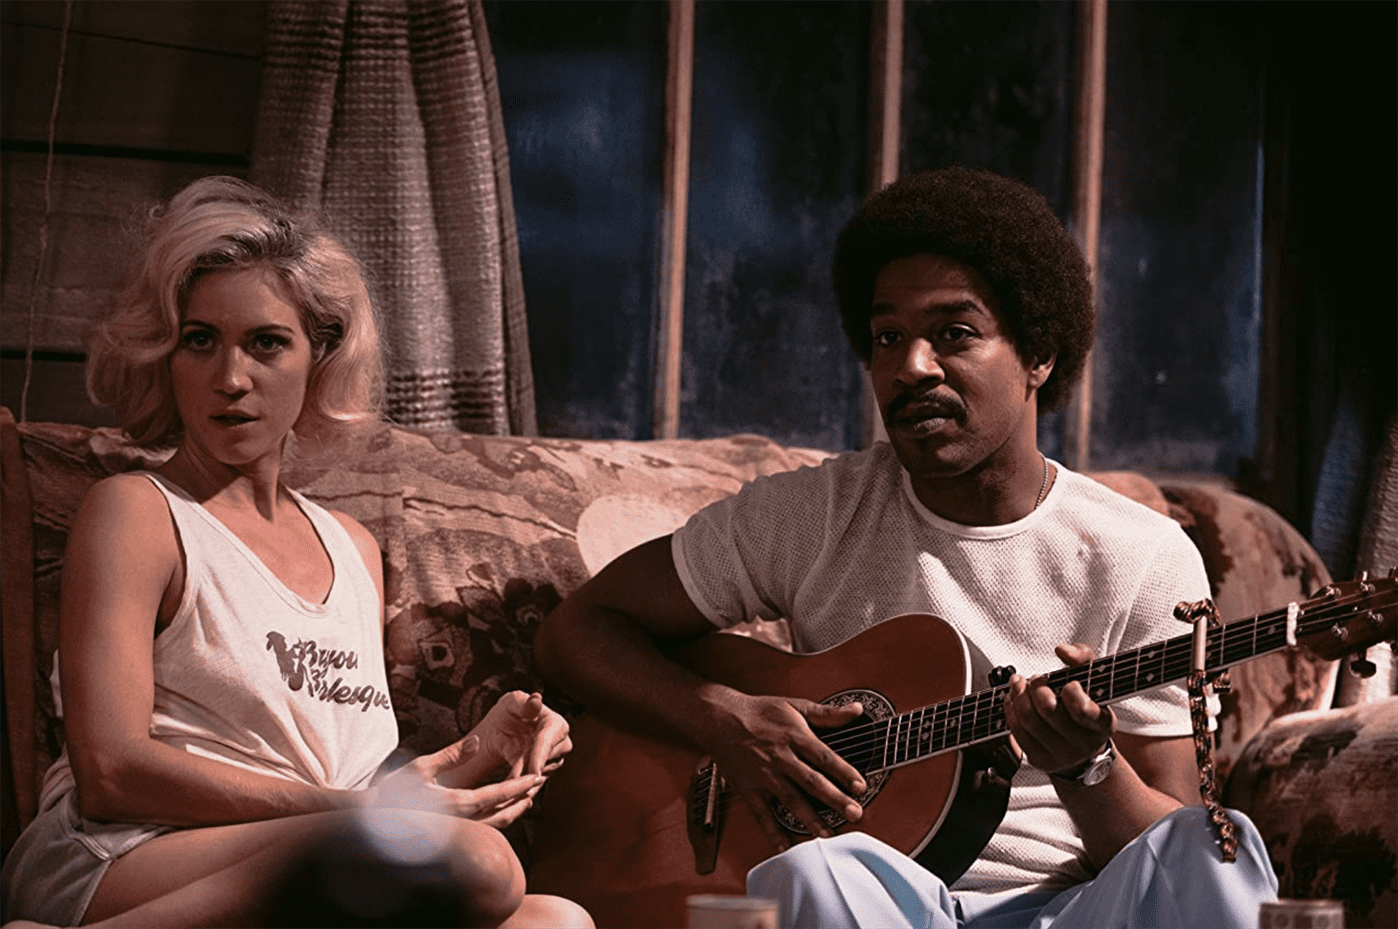 Bobby-Lynne (Brittany Snow) and Jackson (Kid Cudi) serenade the rest of the cast. Photo courtesy of A24